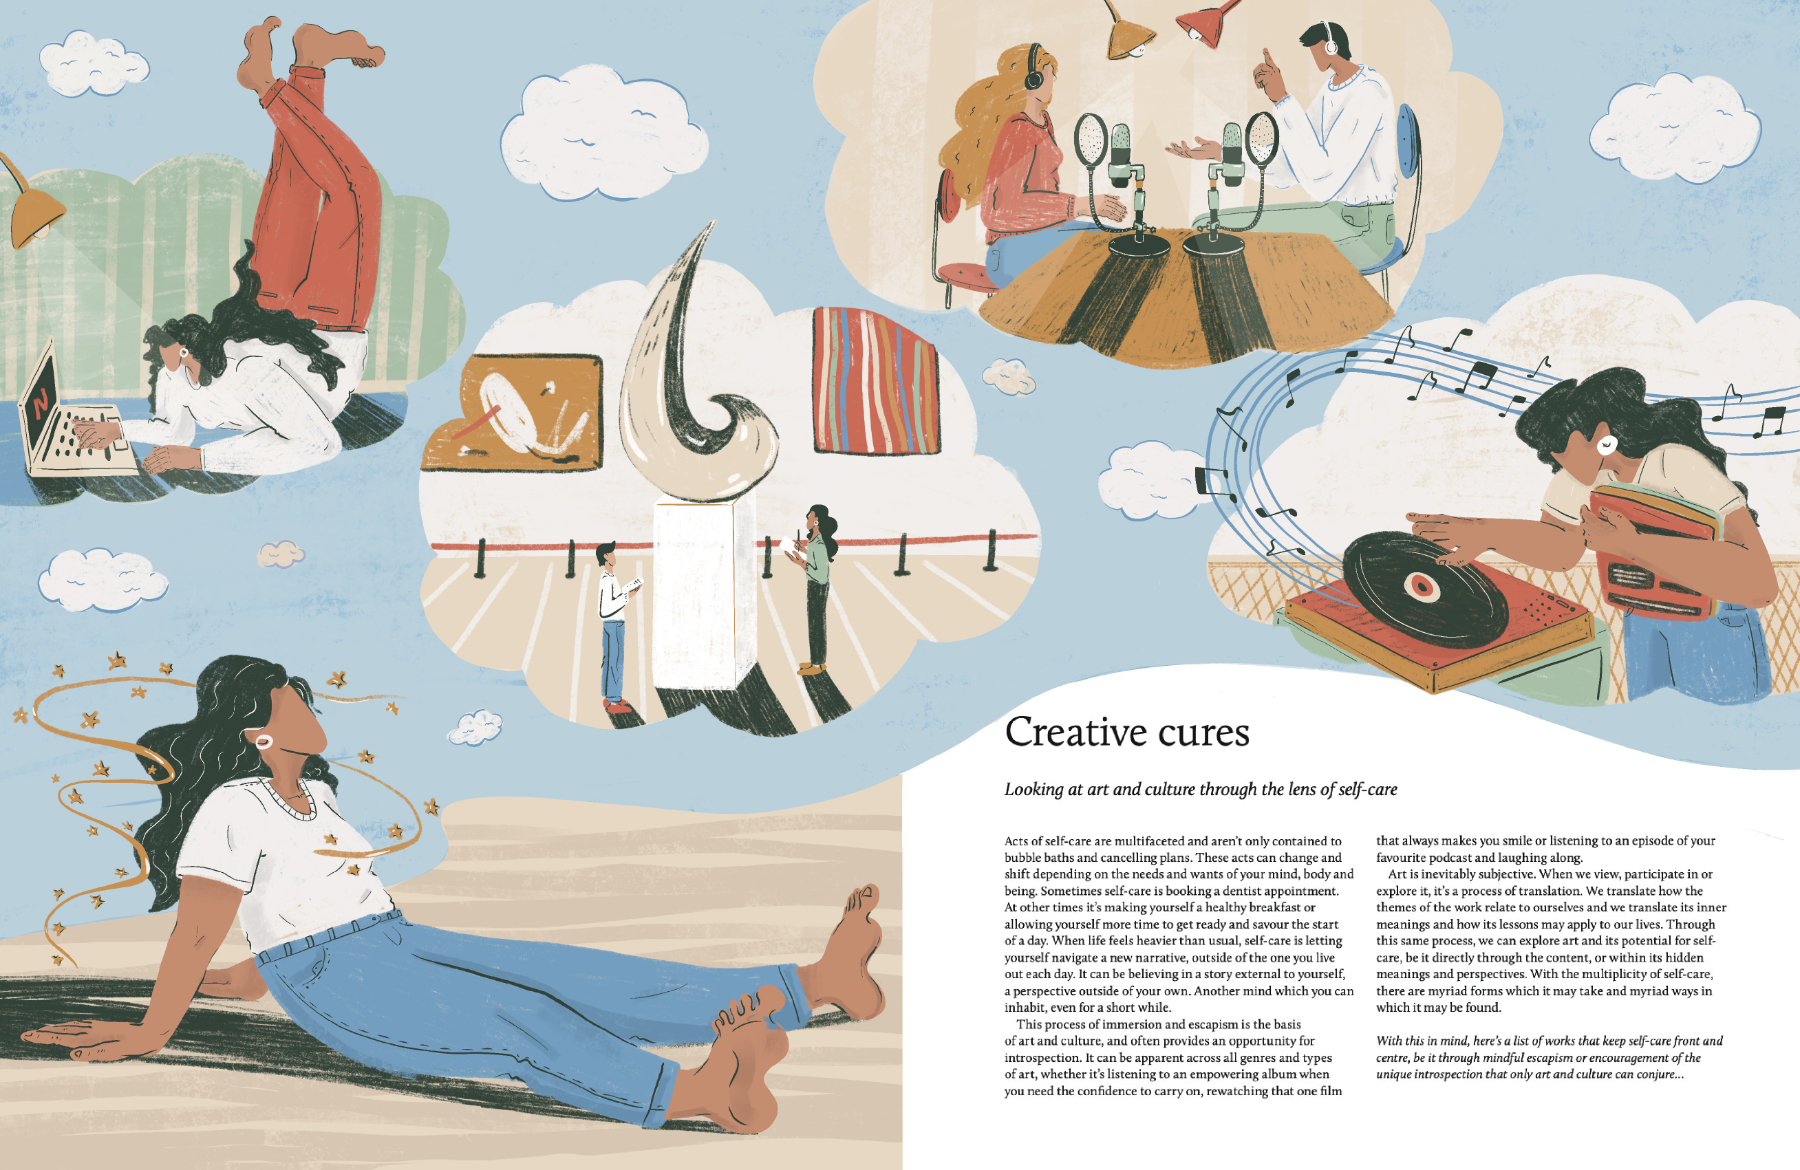 “Creative Cures”